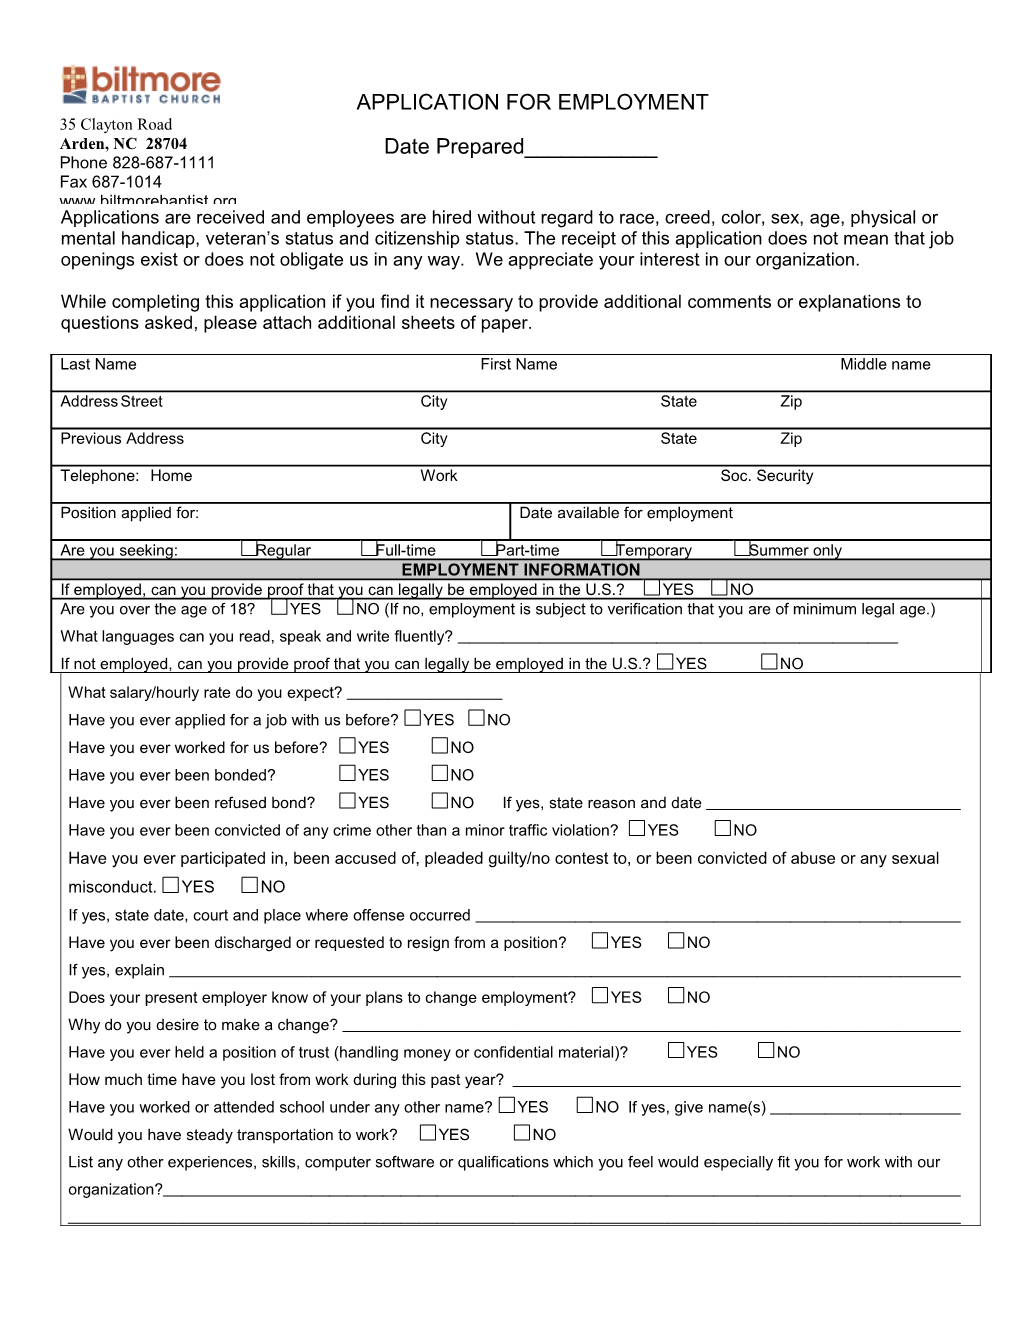 Application for Employment s111